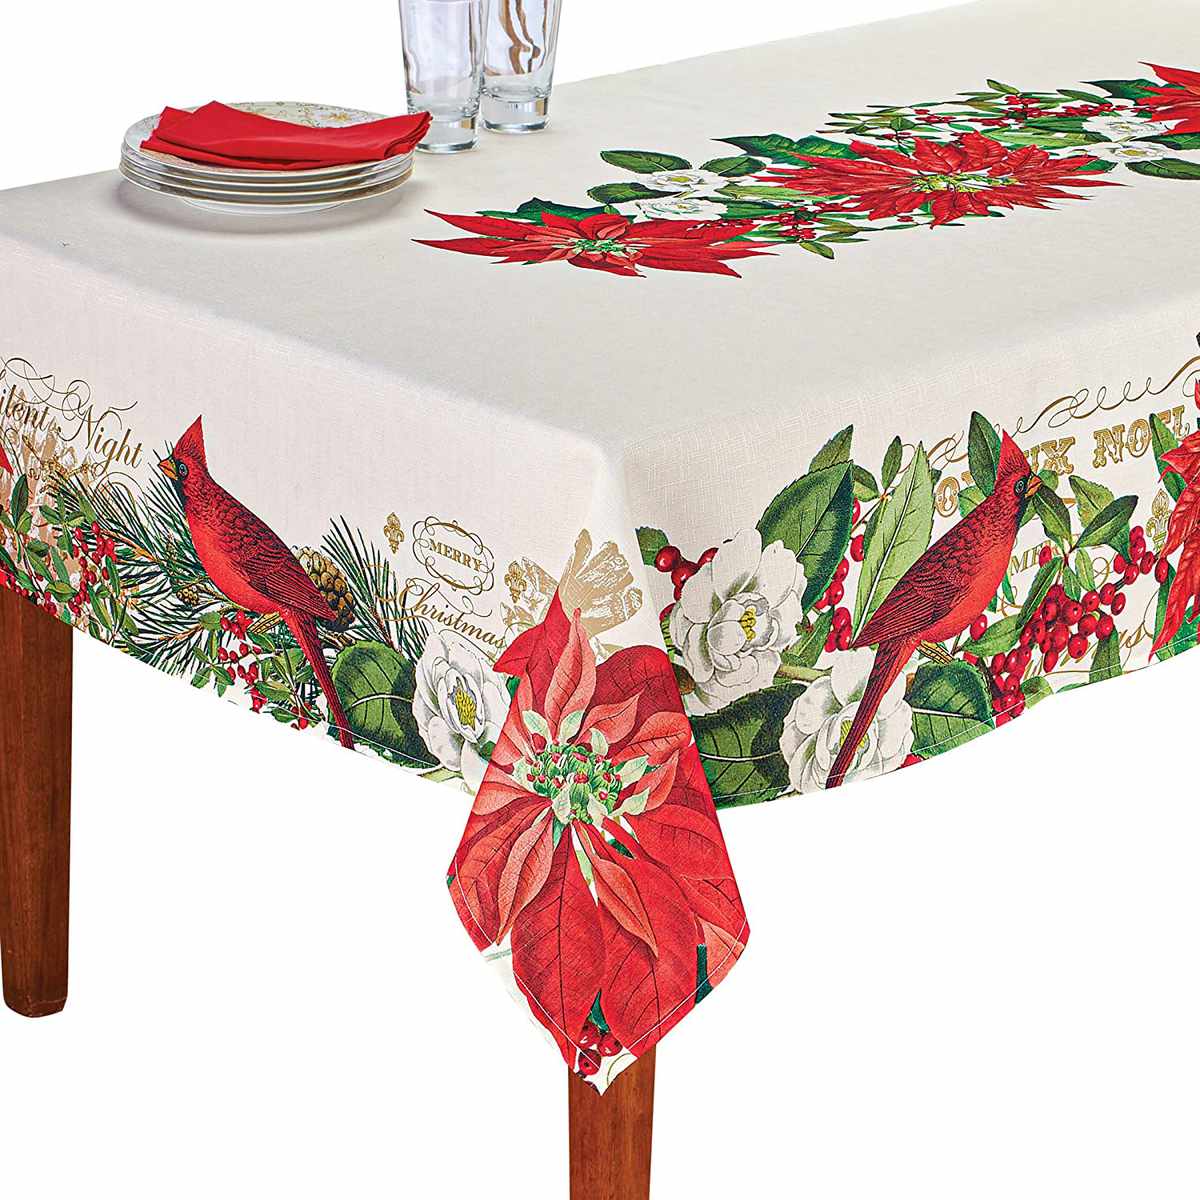 Exploded Plaid White & Silver Metallic Tablecloth Christmas/Holiday 84" x 60" 